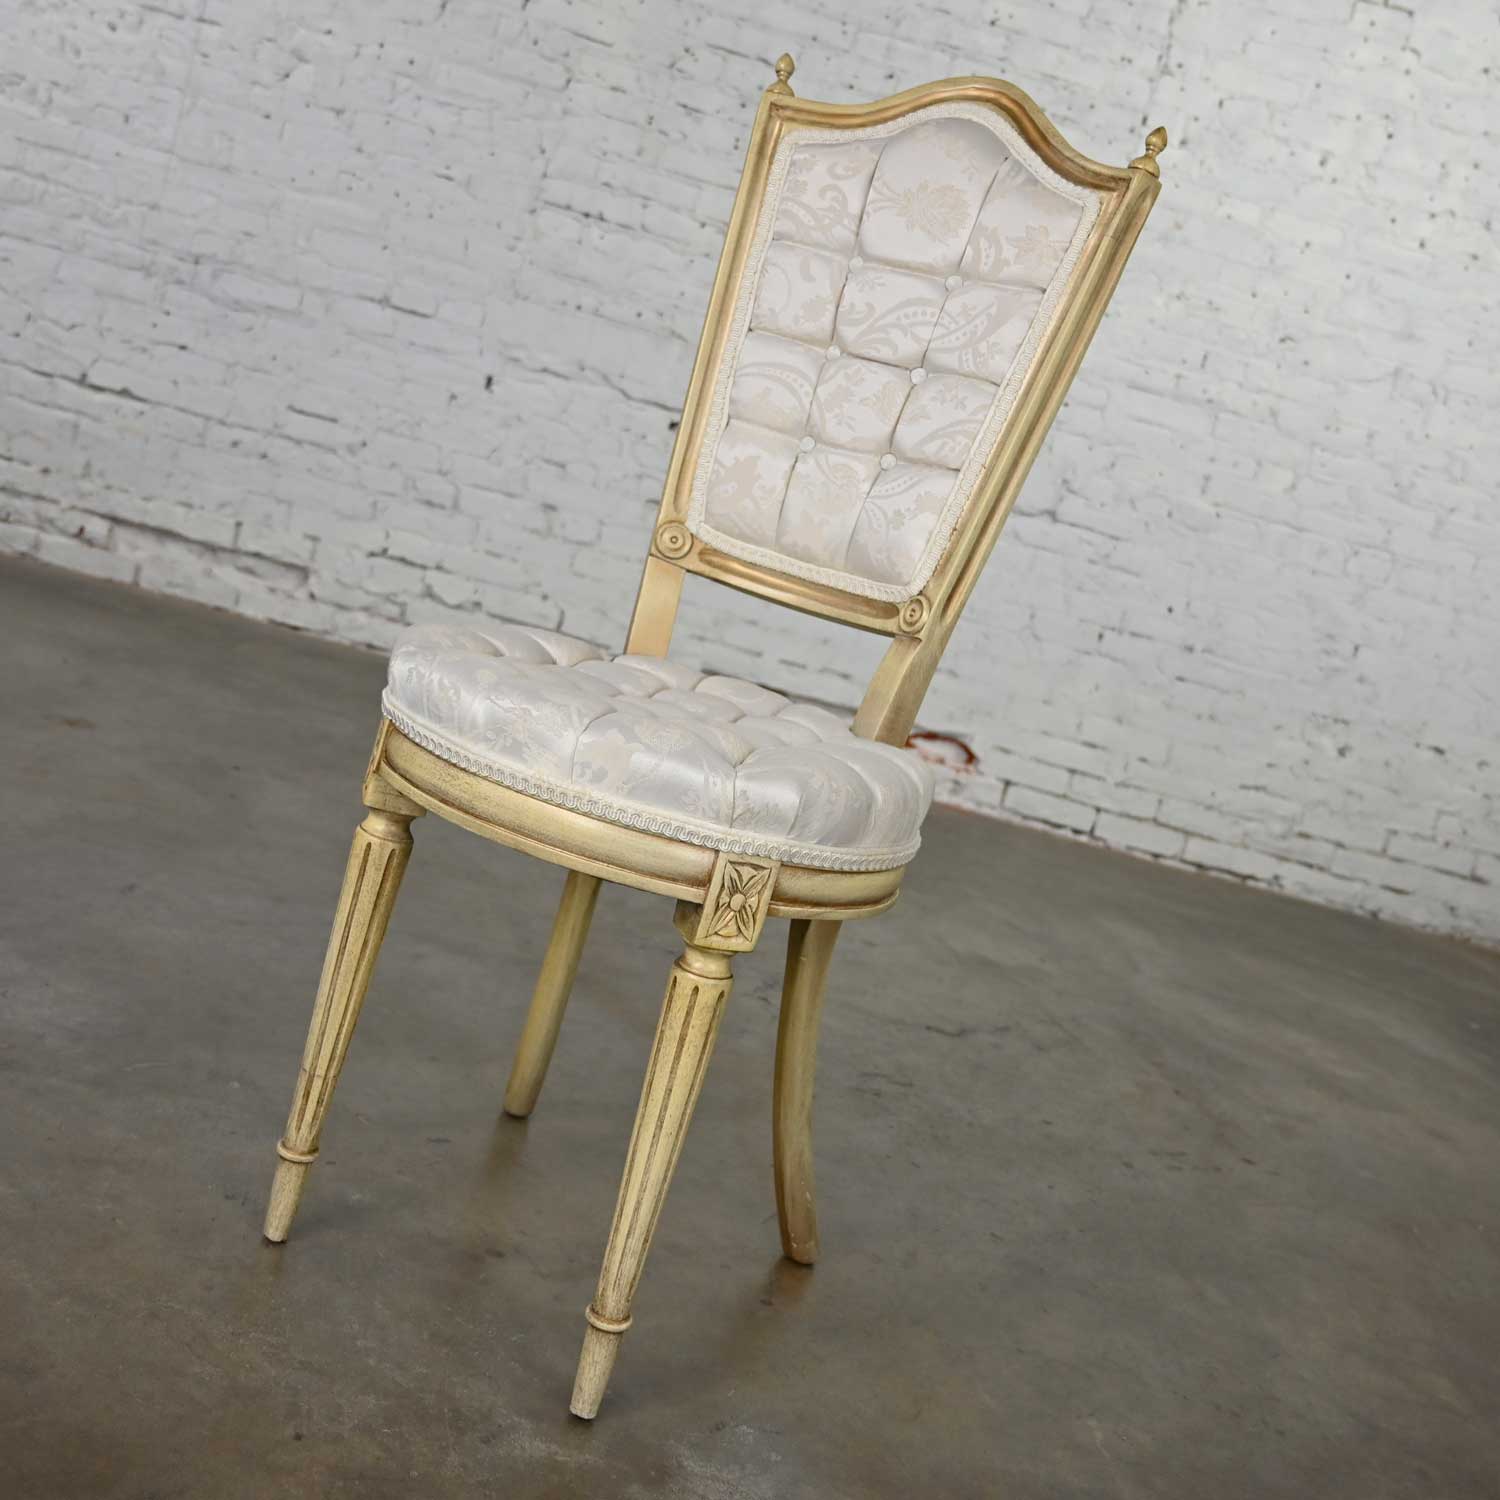 Hollywood Regency Louis XVI Style Antique White Dressing or Accent Chair Attributed to Prince Howard